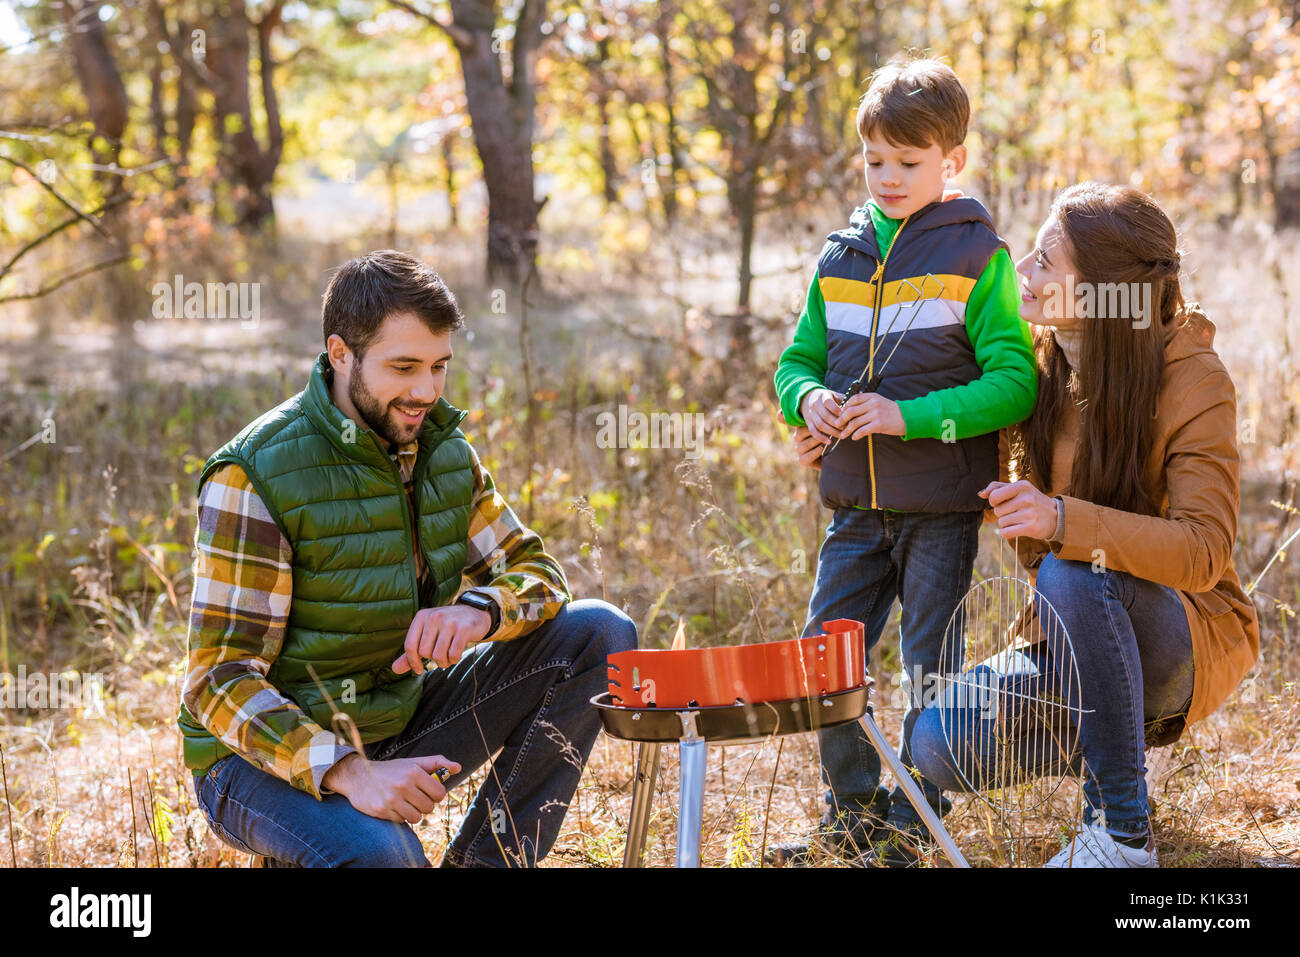 Portrait of happy family with one child preparing barbecue on grill in autumn park Stock Photo